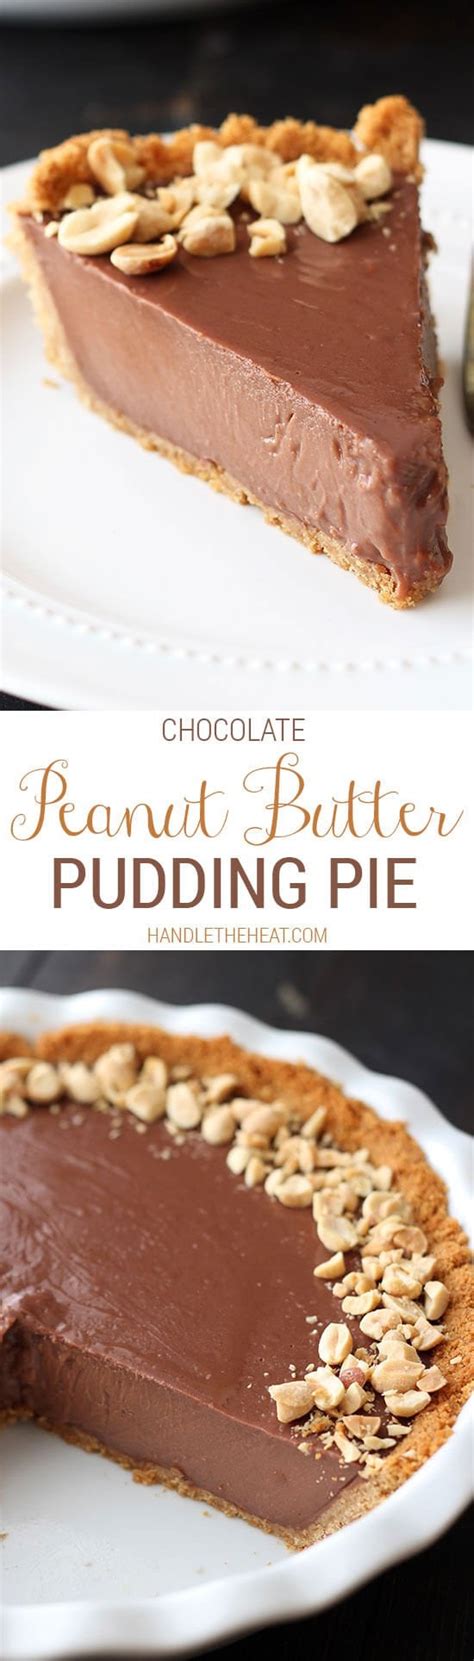 More specifically, a lonely looking amish peanut butter cream pie at that! Chocolate Peanut Butter Pudding Pie - Handle the Heat